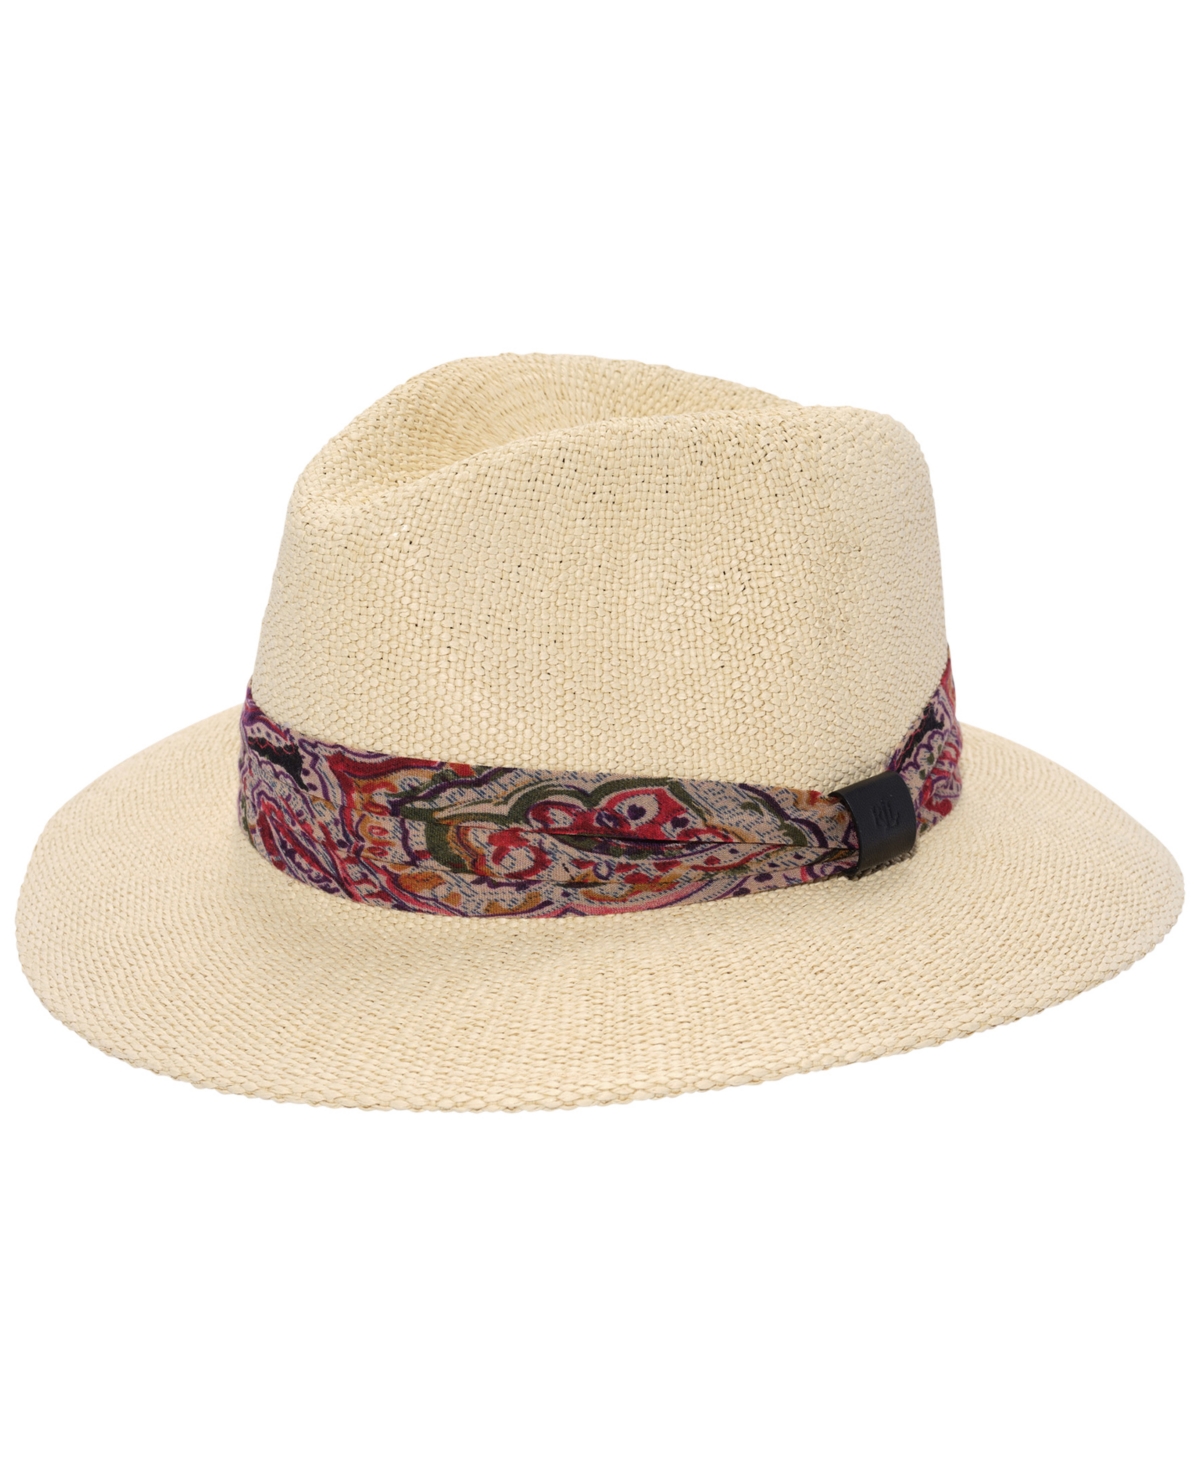 Fabric Band with Fedora Hat - Natural, Black